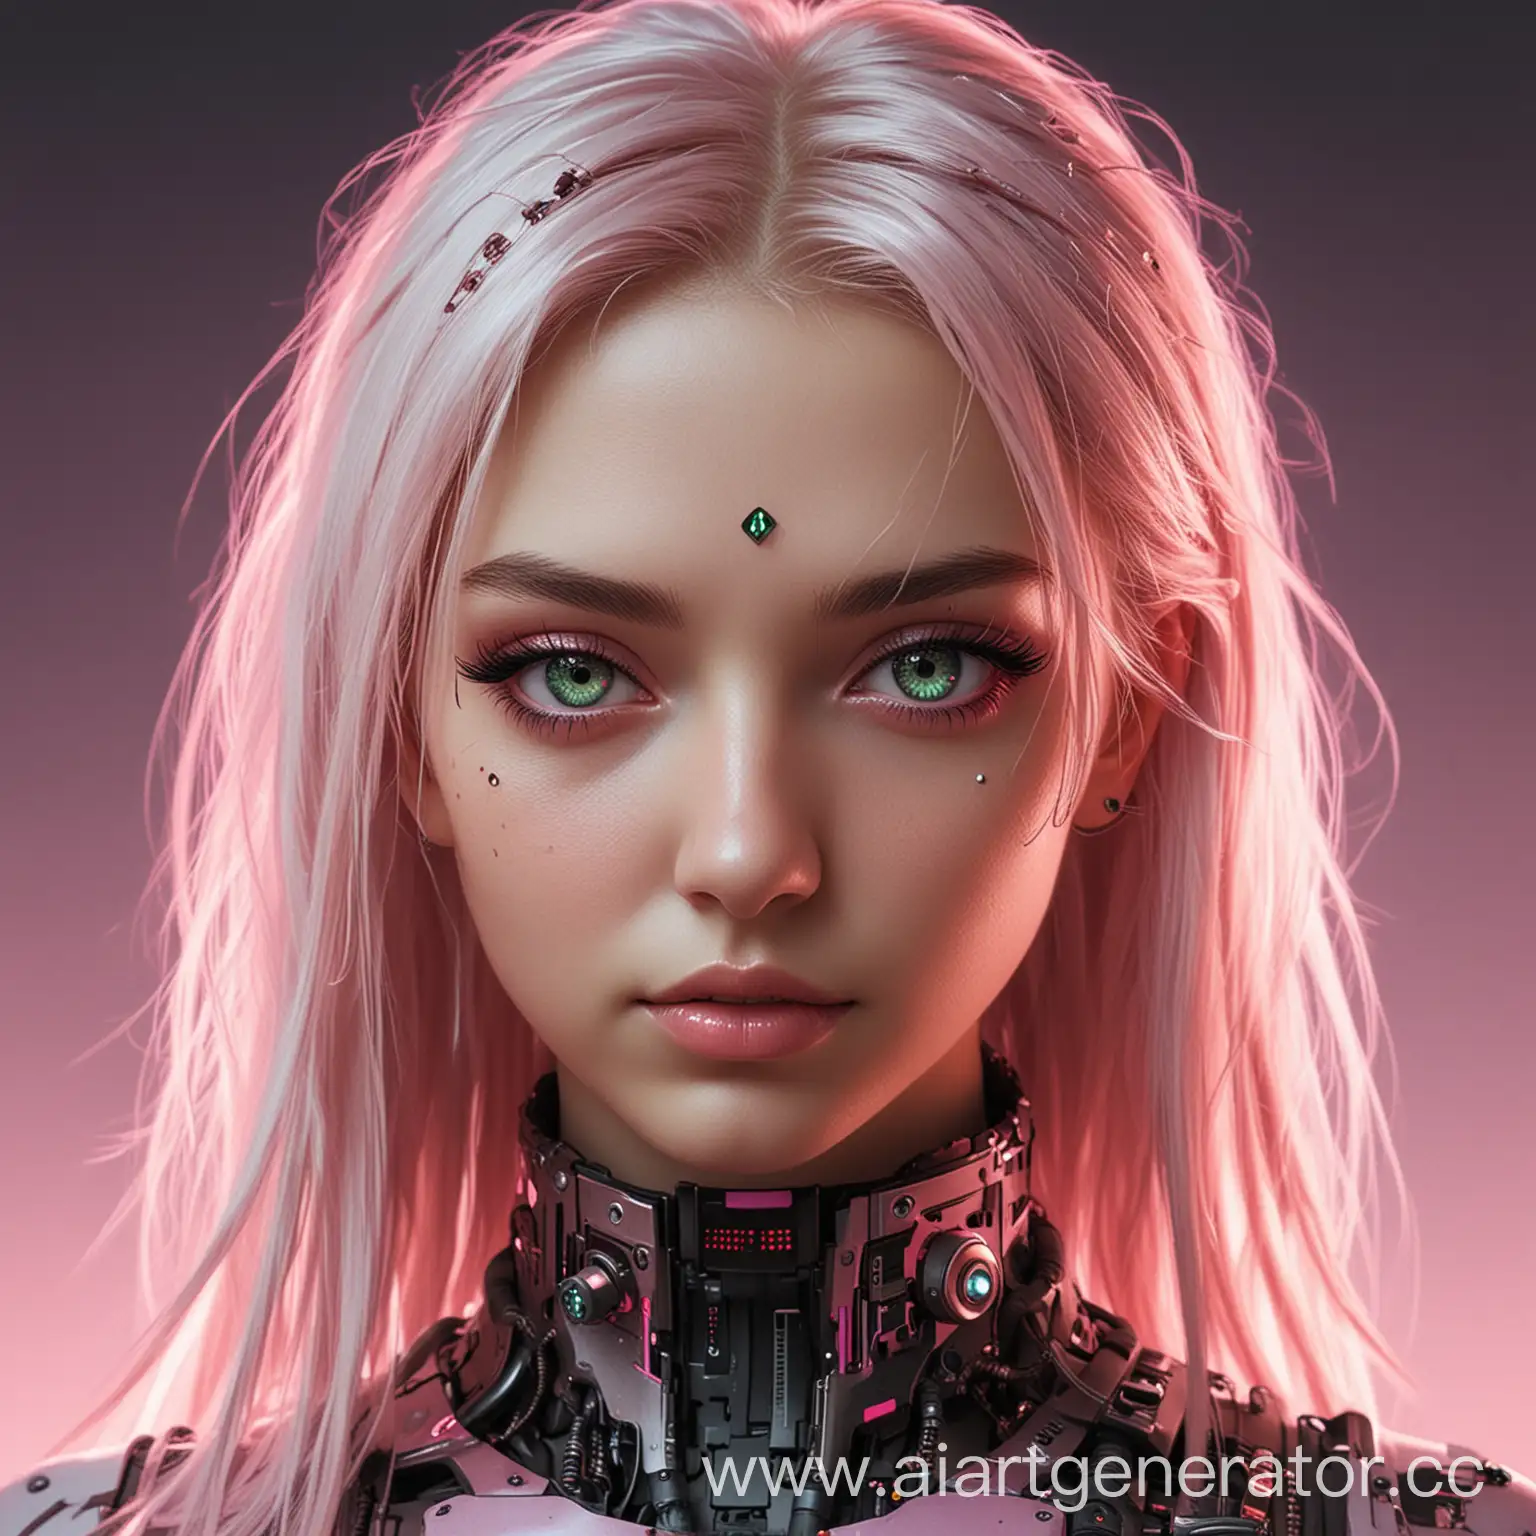 Futuristic-Cyberpunk-Girl-with-Green-Eyes-and-Light-Hair-in-Pink-Tones